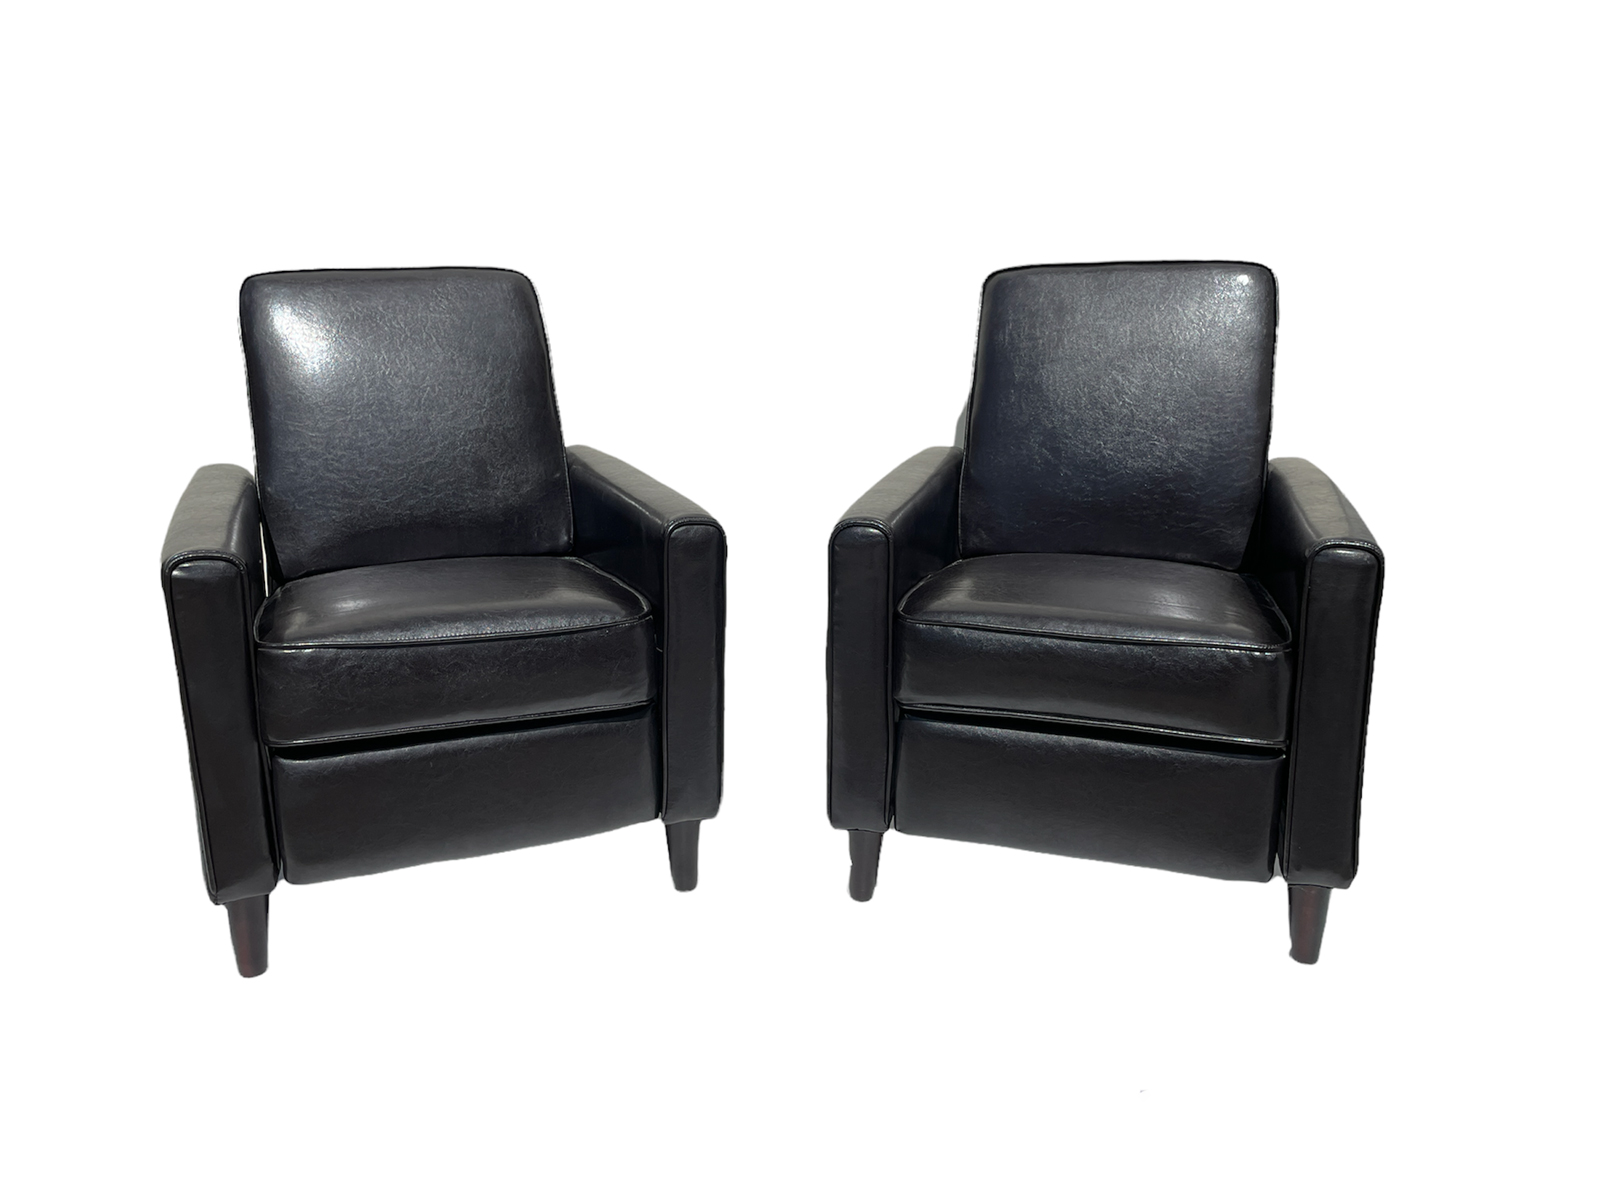 2 PC MODERN RECLINING LOUNGE CHAIRS  36a943